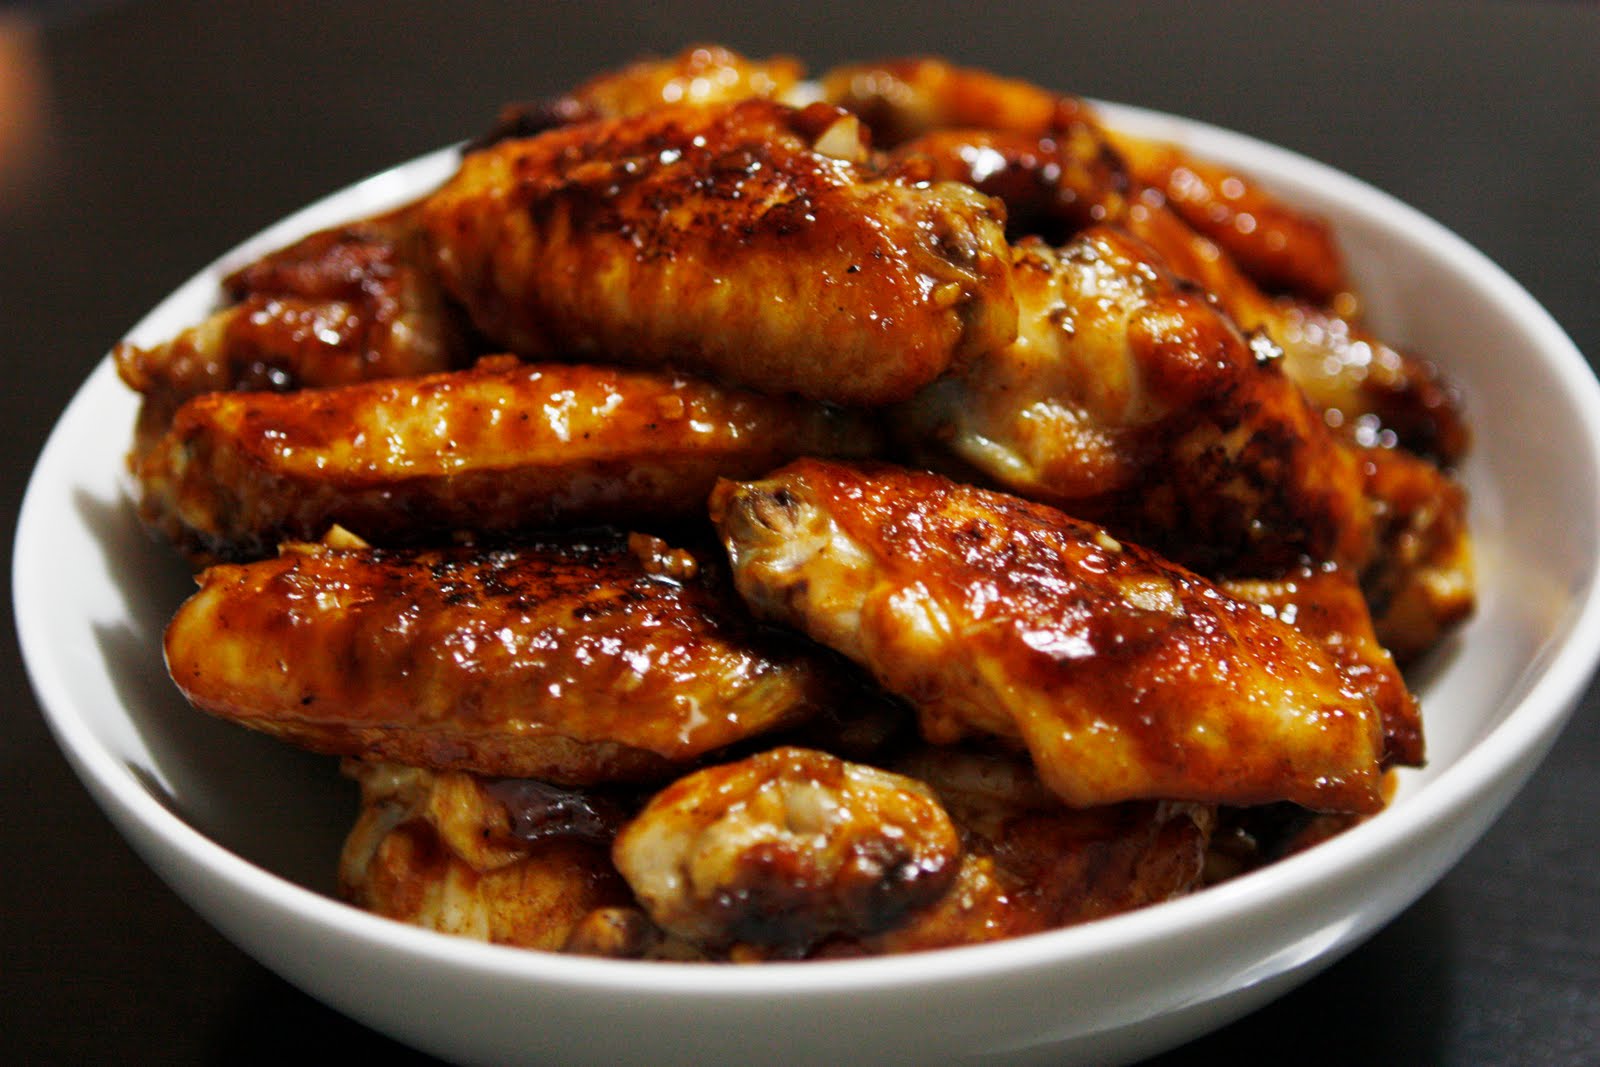 sUgArcrUnch: Marinated Chicken Wings